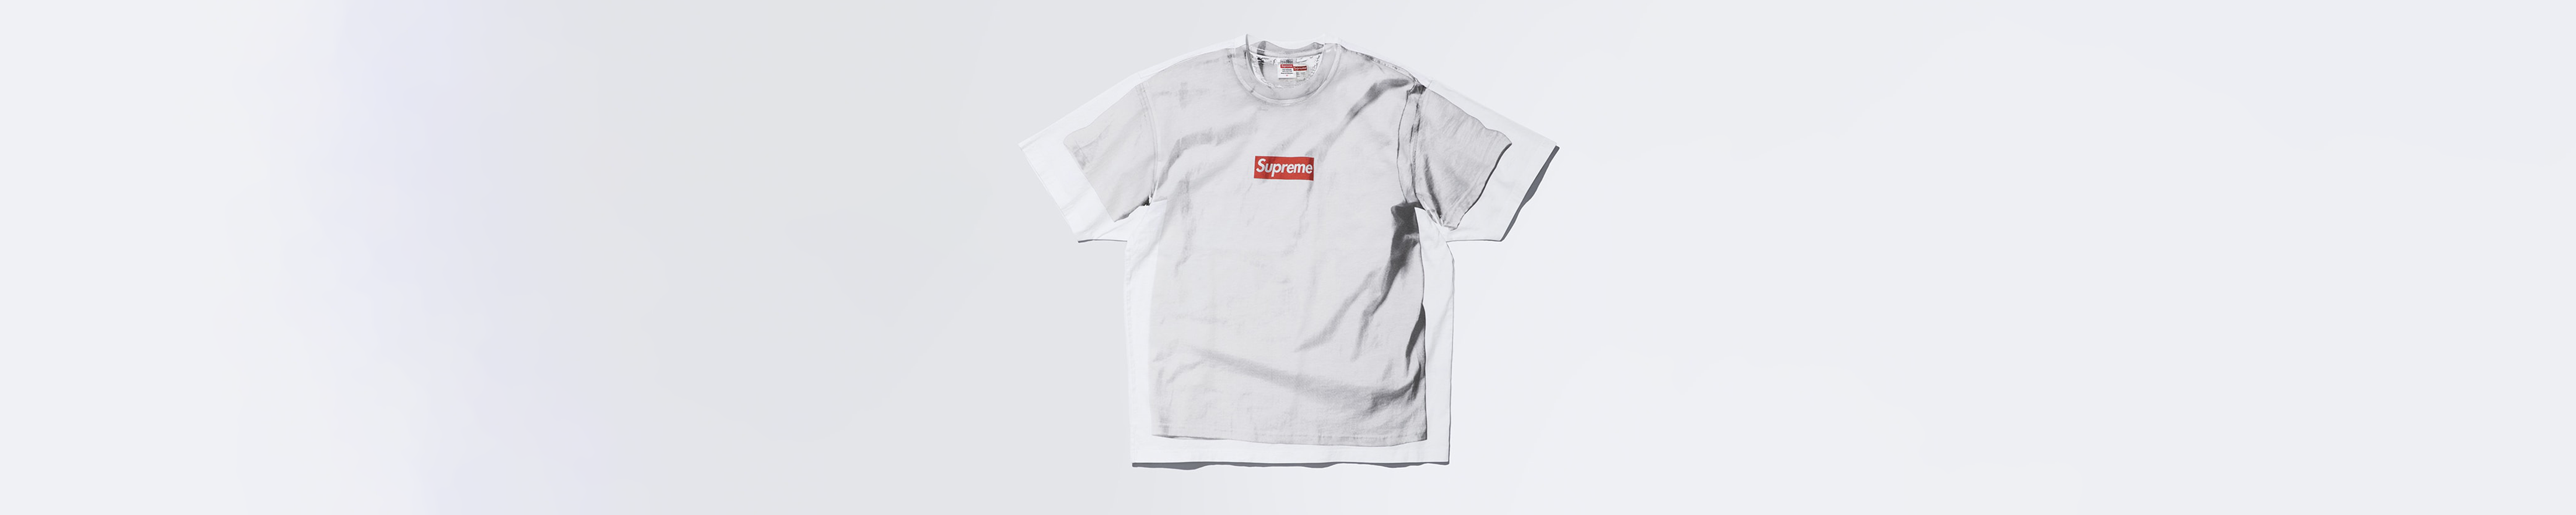 Supreme x MM6 Maison Margiela Is Officially Confirmed